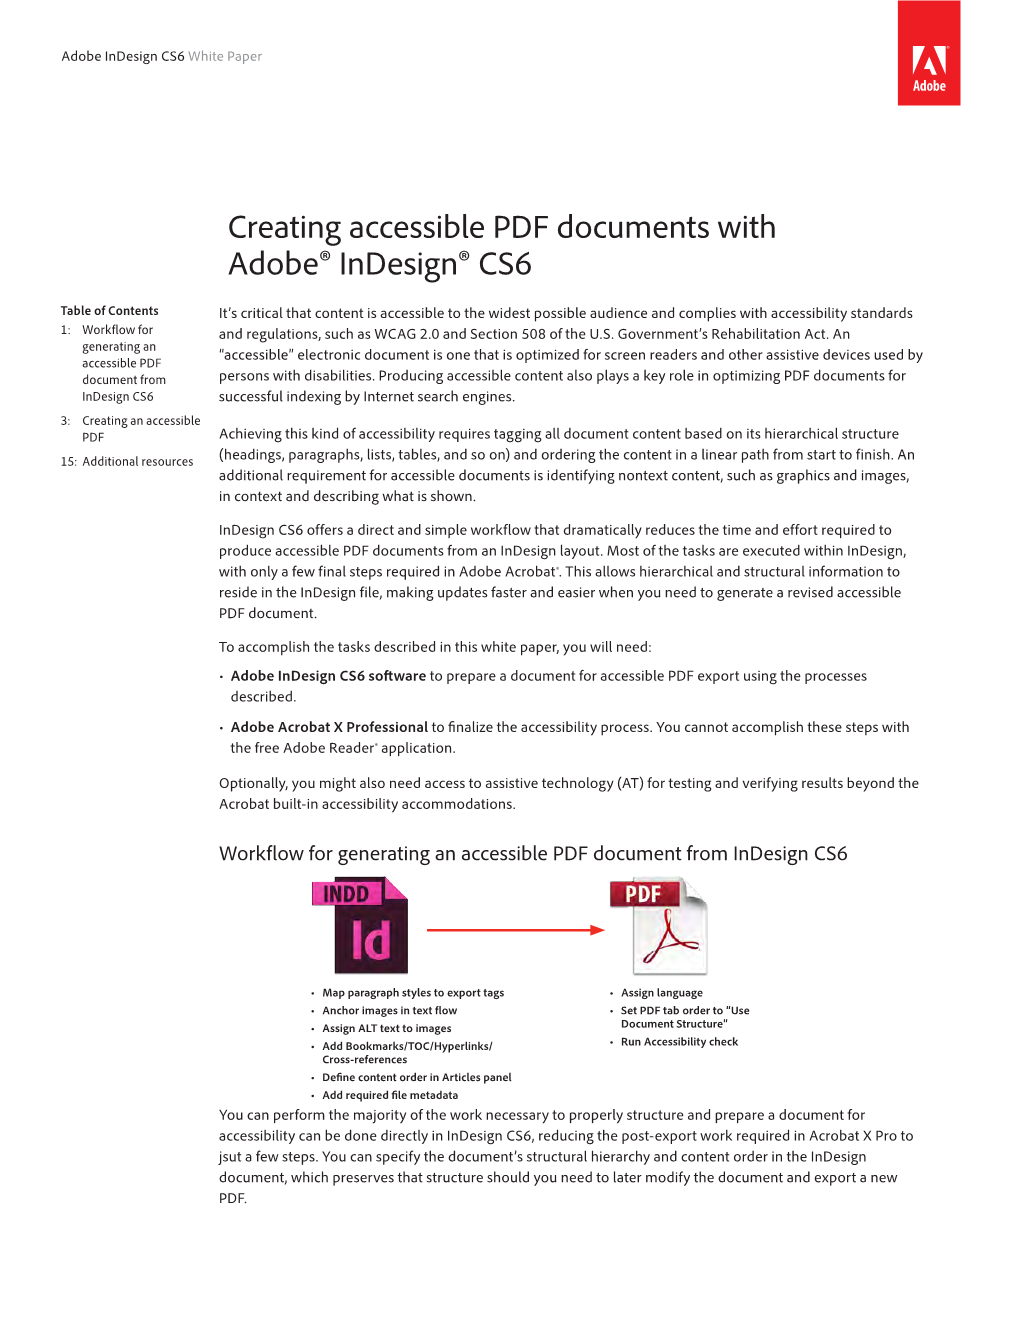 Creating Accessible PDF Documents with Adobe Indesign